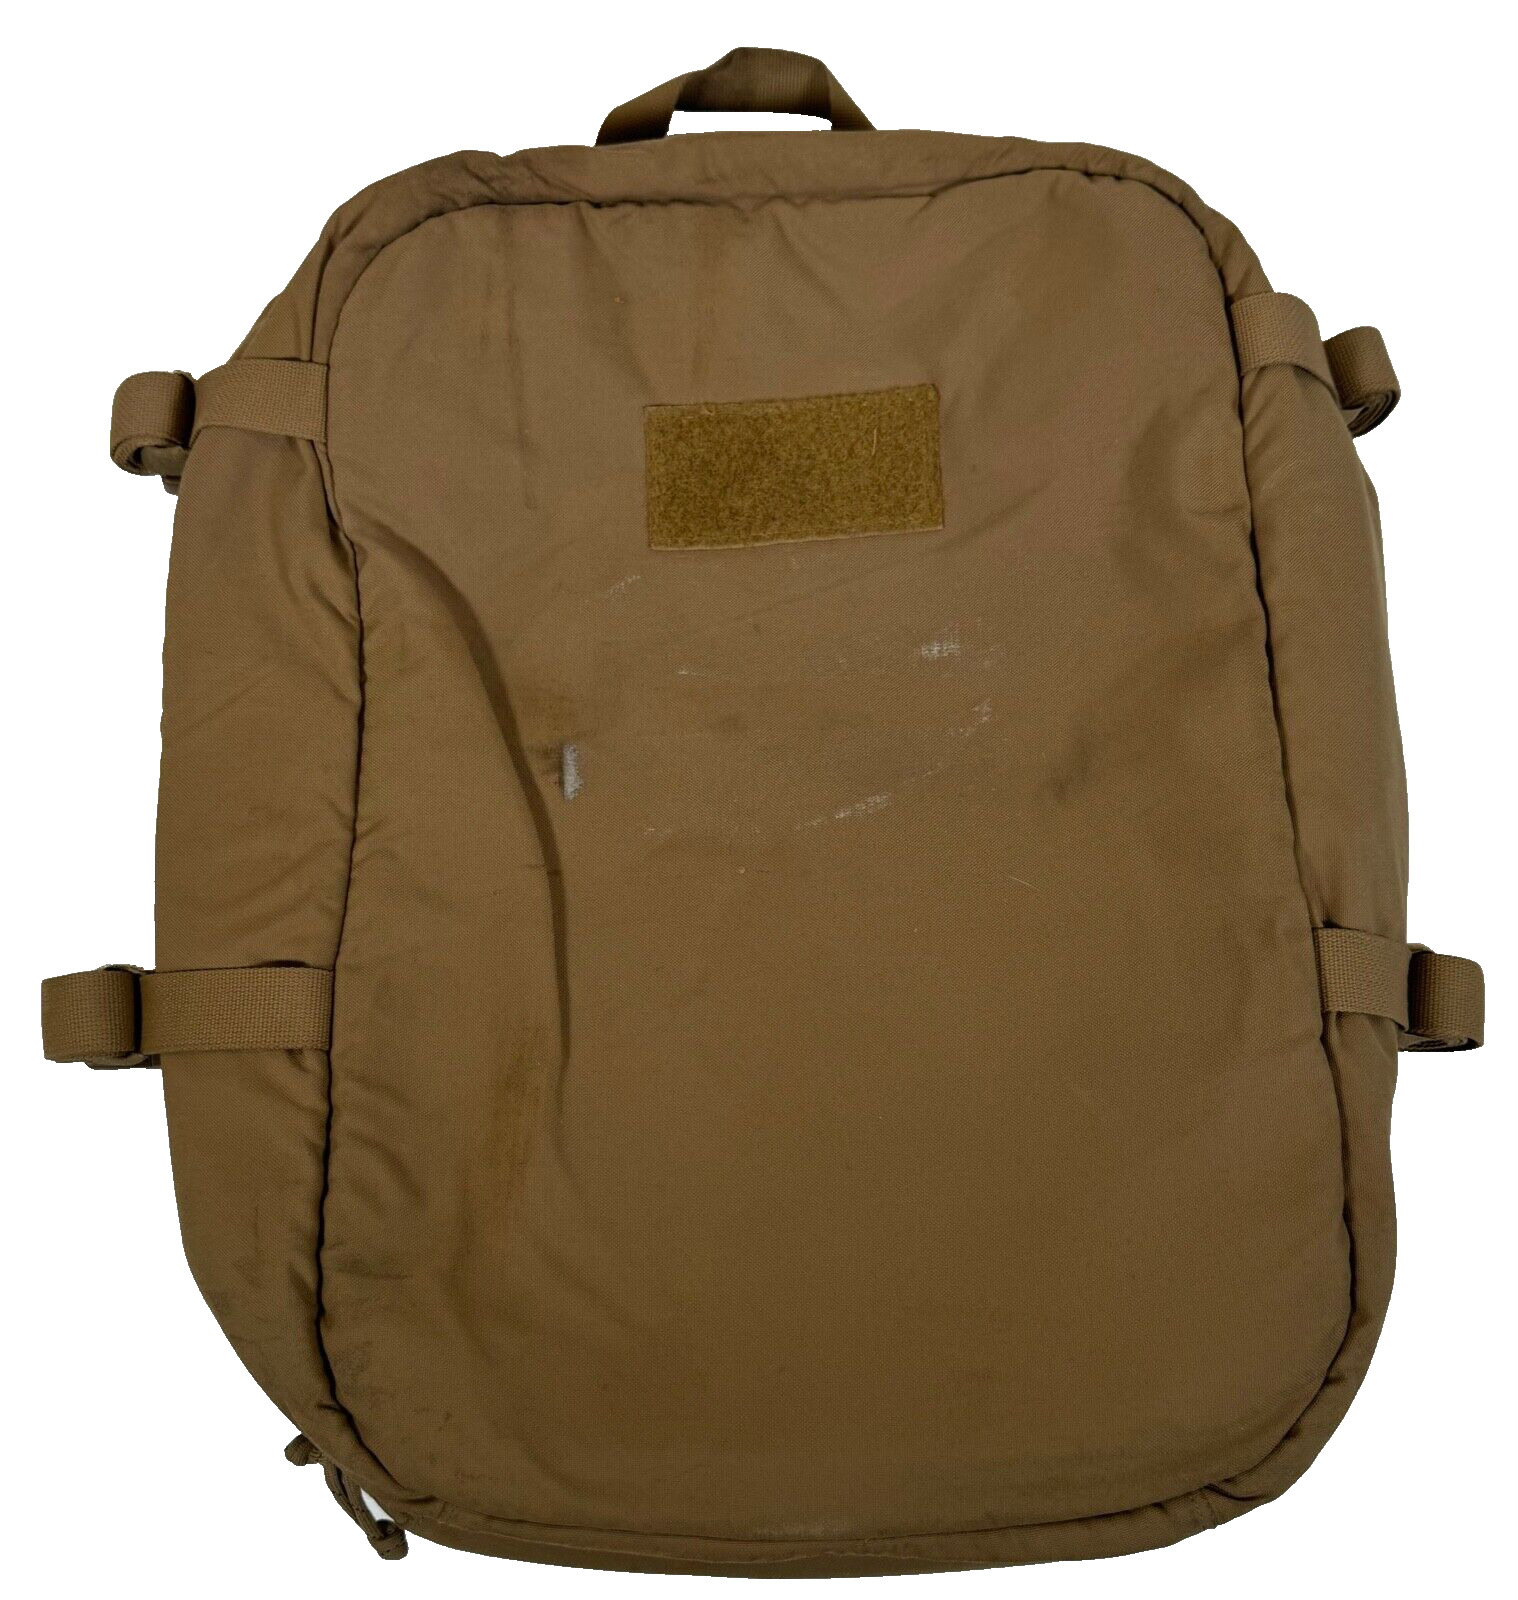 USMC CAS Medical Sustainment Corpsman Bag Pack Backpack w/Inserts Coyote Tan